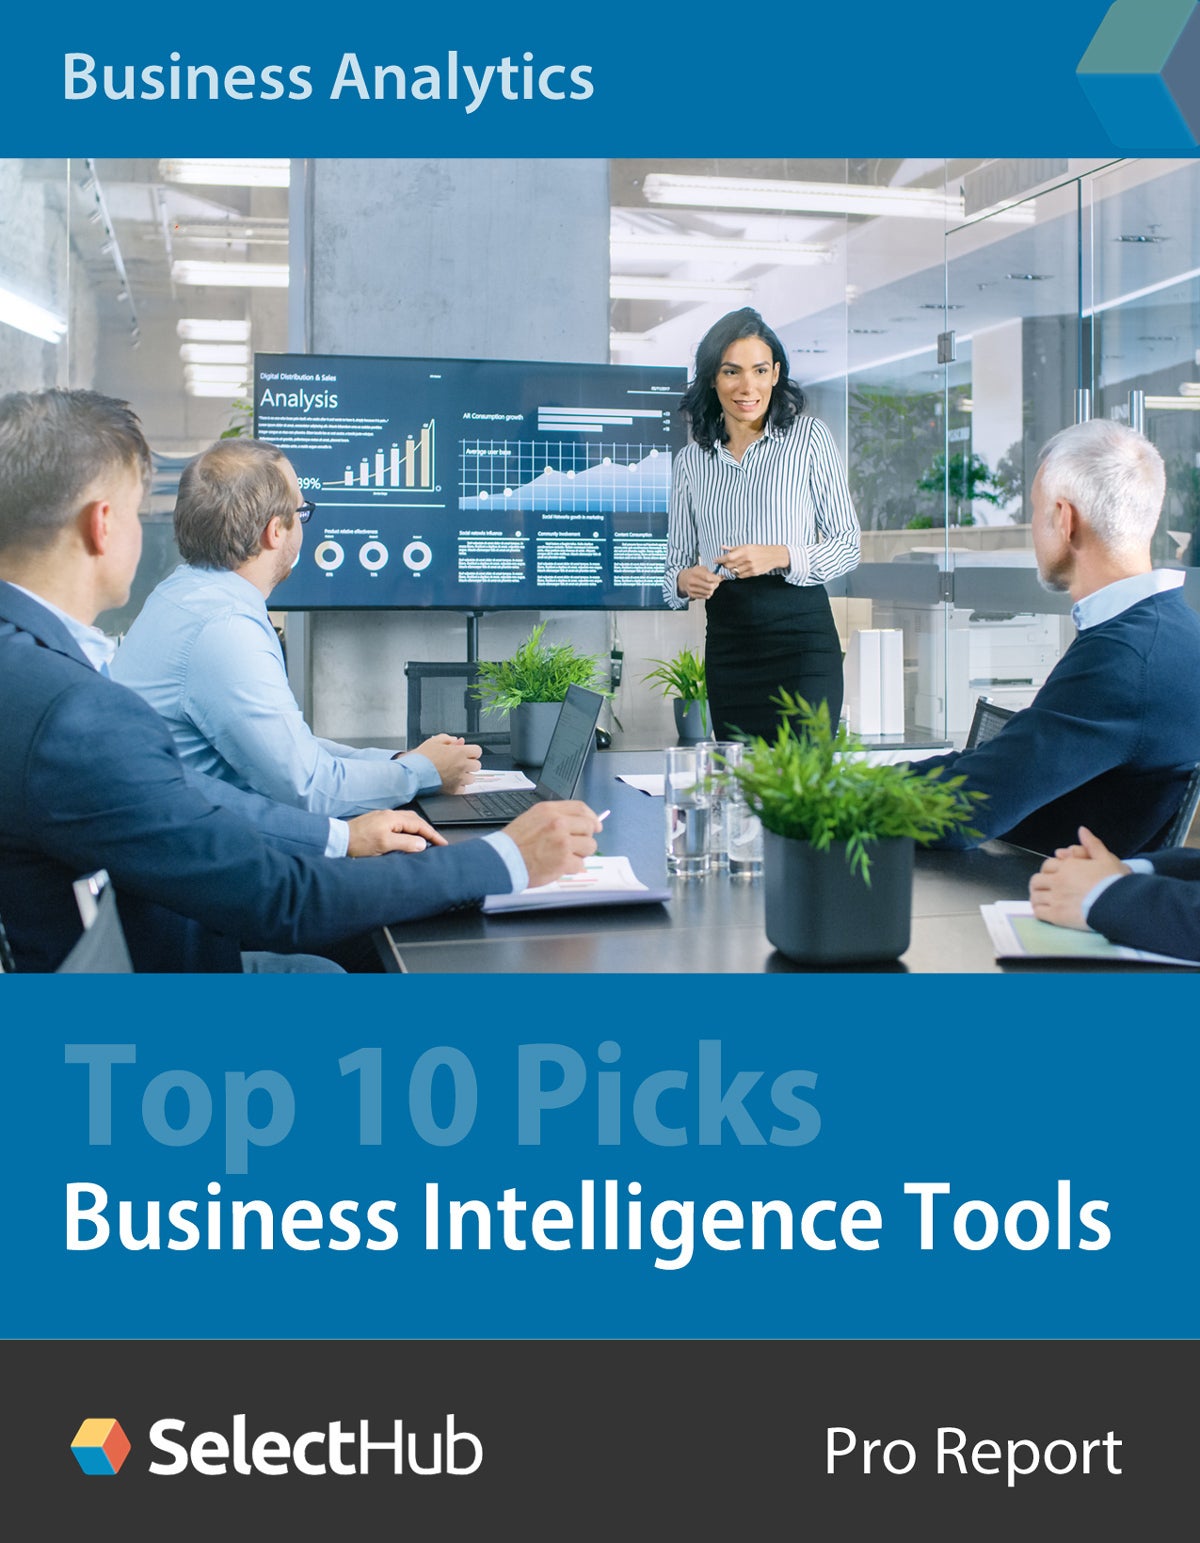 Image: Business Intelligence Tools: Top 10 Picks for 2020